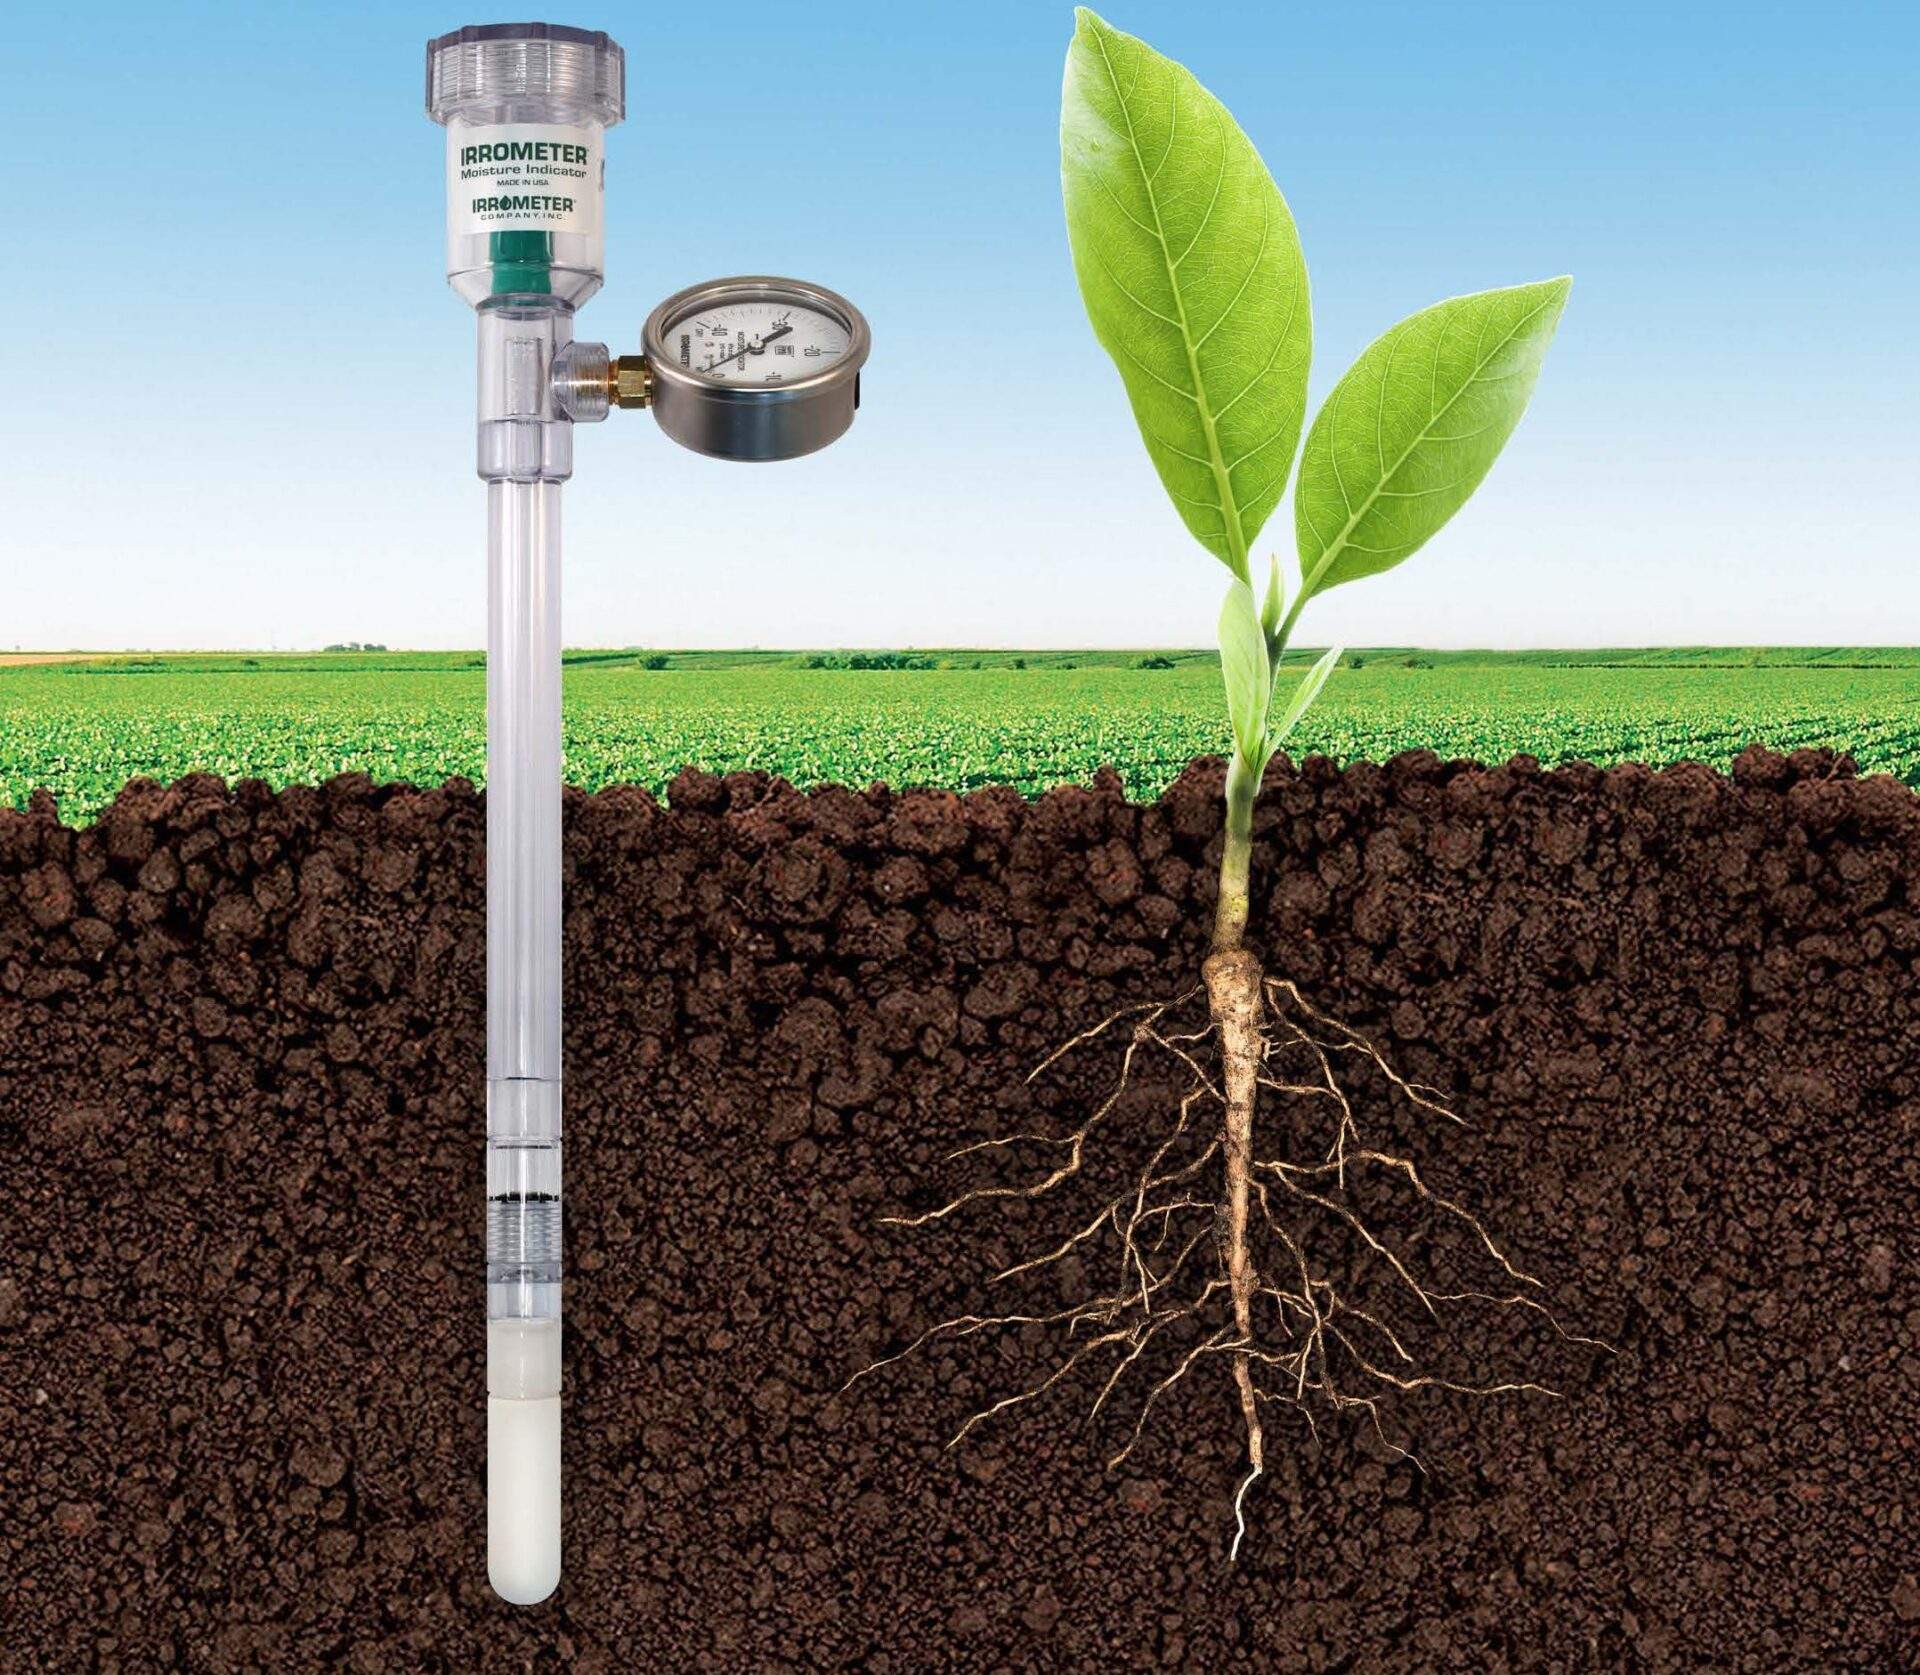 Irrometer in soil next to roots